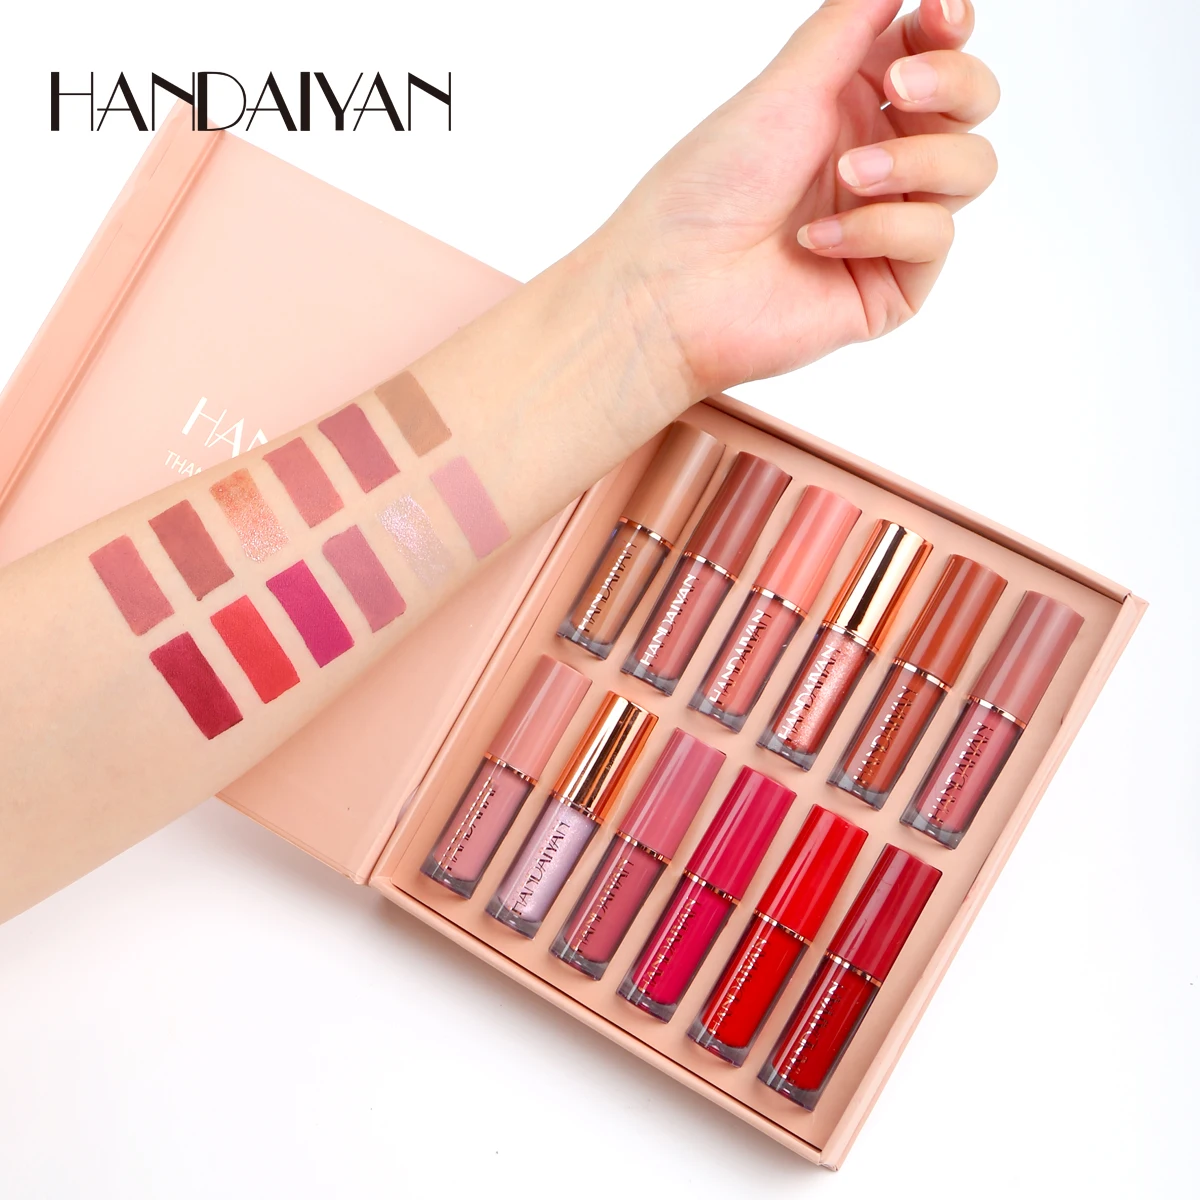 

2022 luxury lip gloss handaiyan 12 color matte lip gloss set labiales private label lipgloss with custom packaging unique